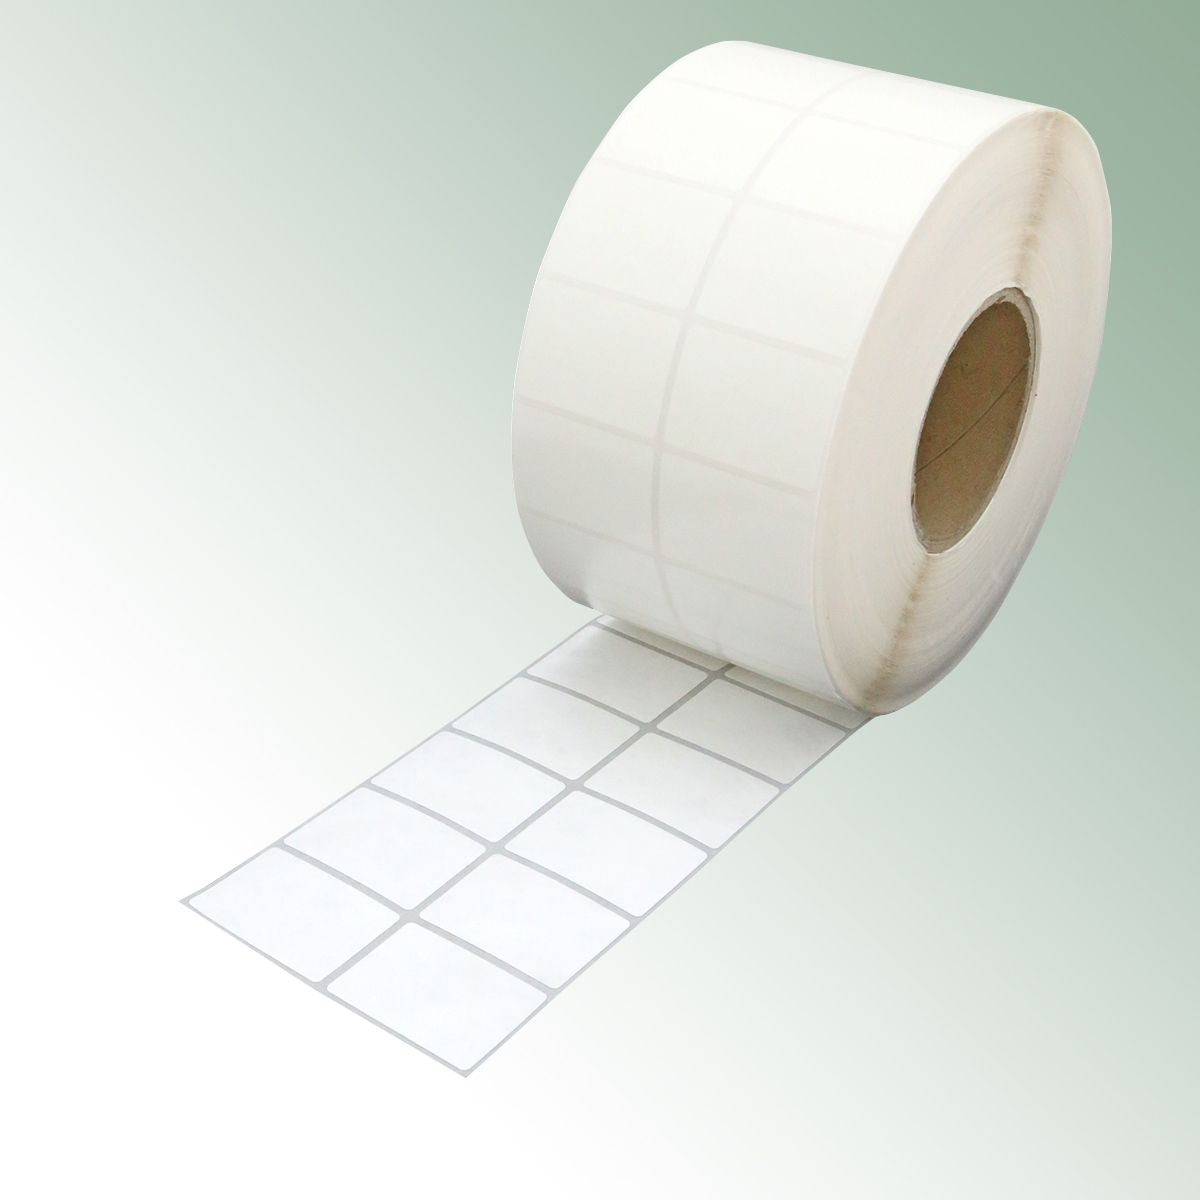 Thermal-Transfer Adhesive Files/Labels, Lettering Supplies 50x35mm - Roll = 4000 pieces